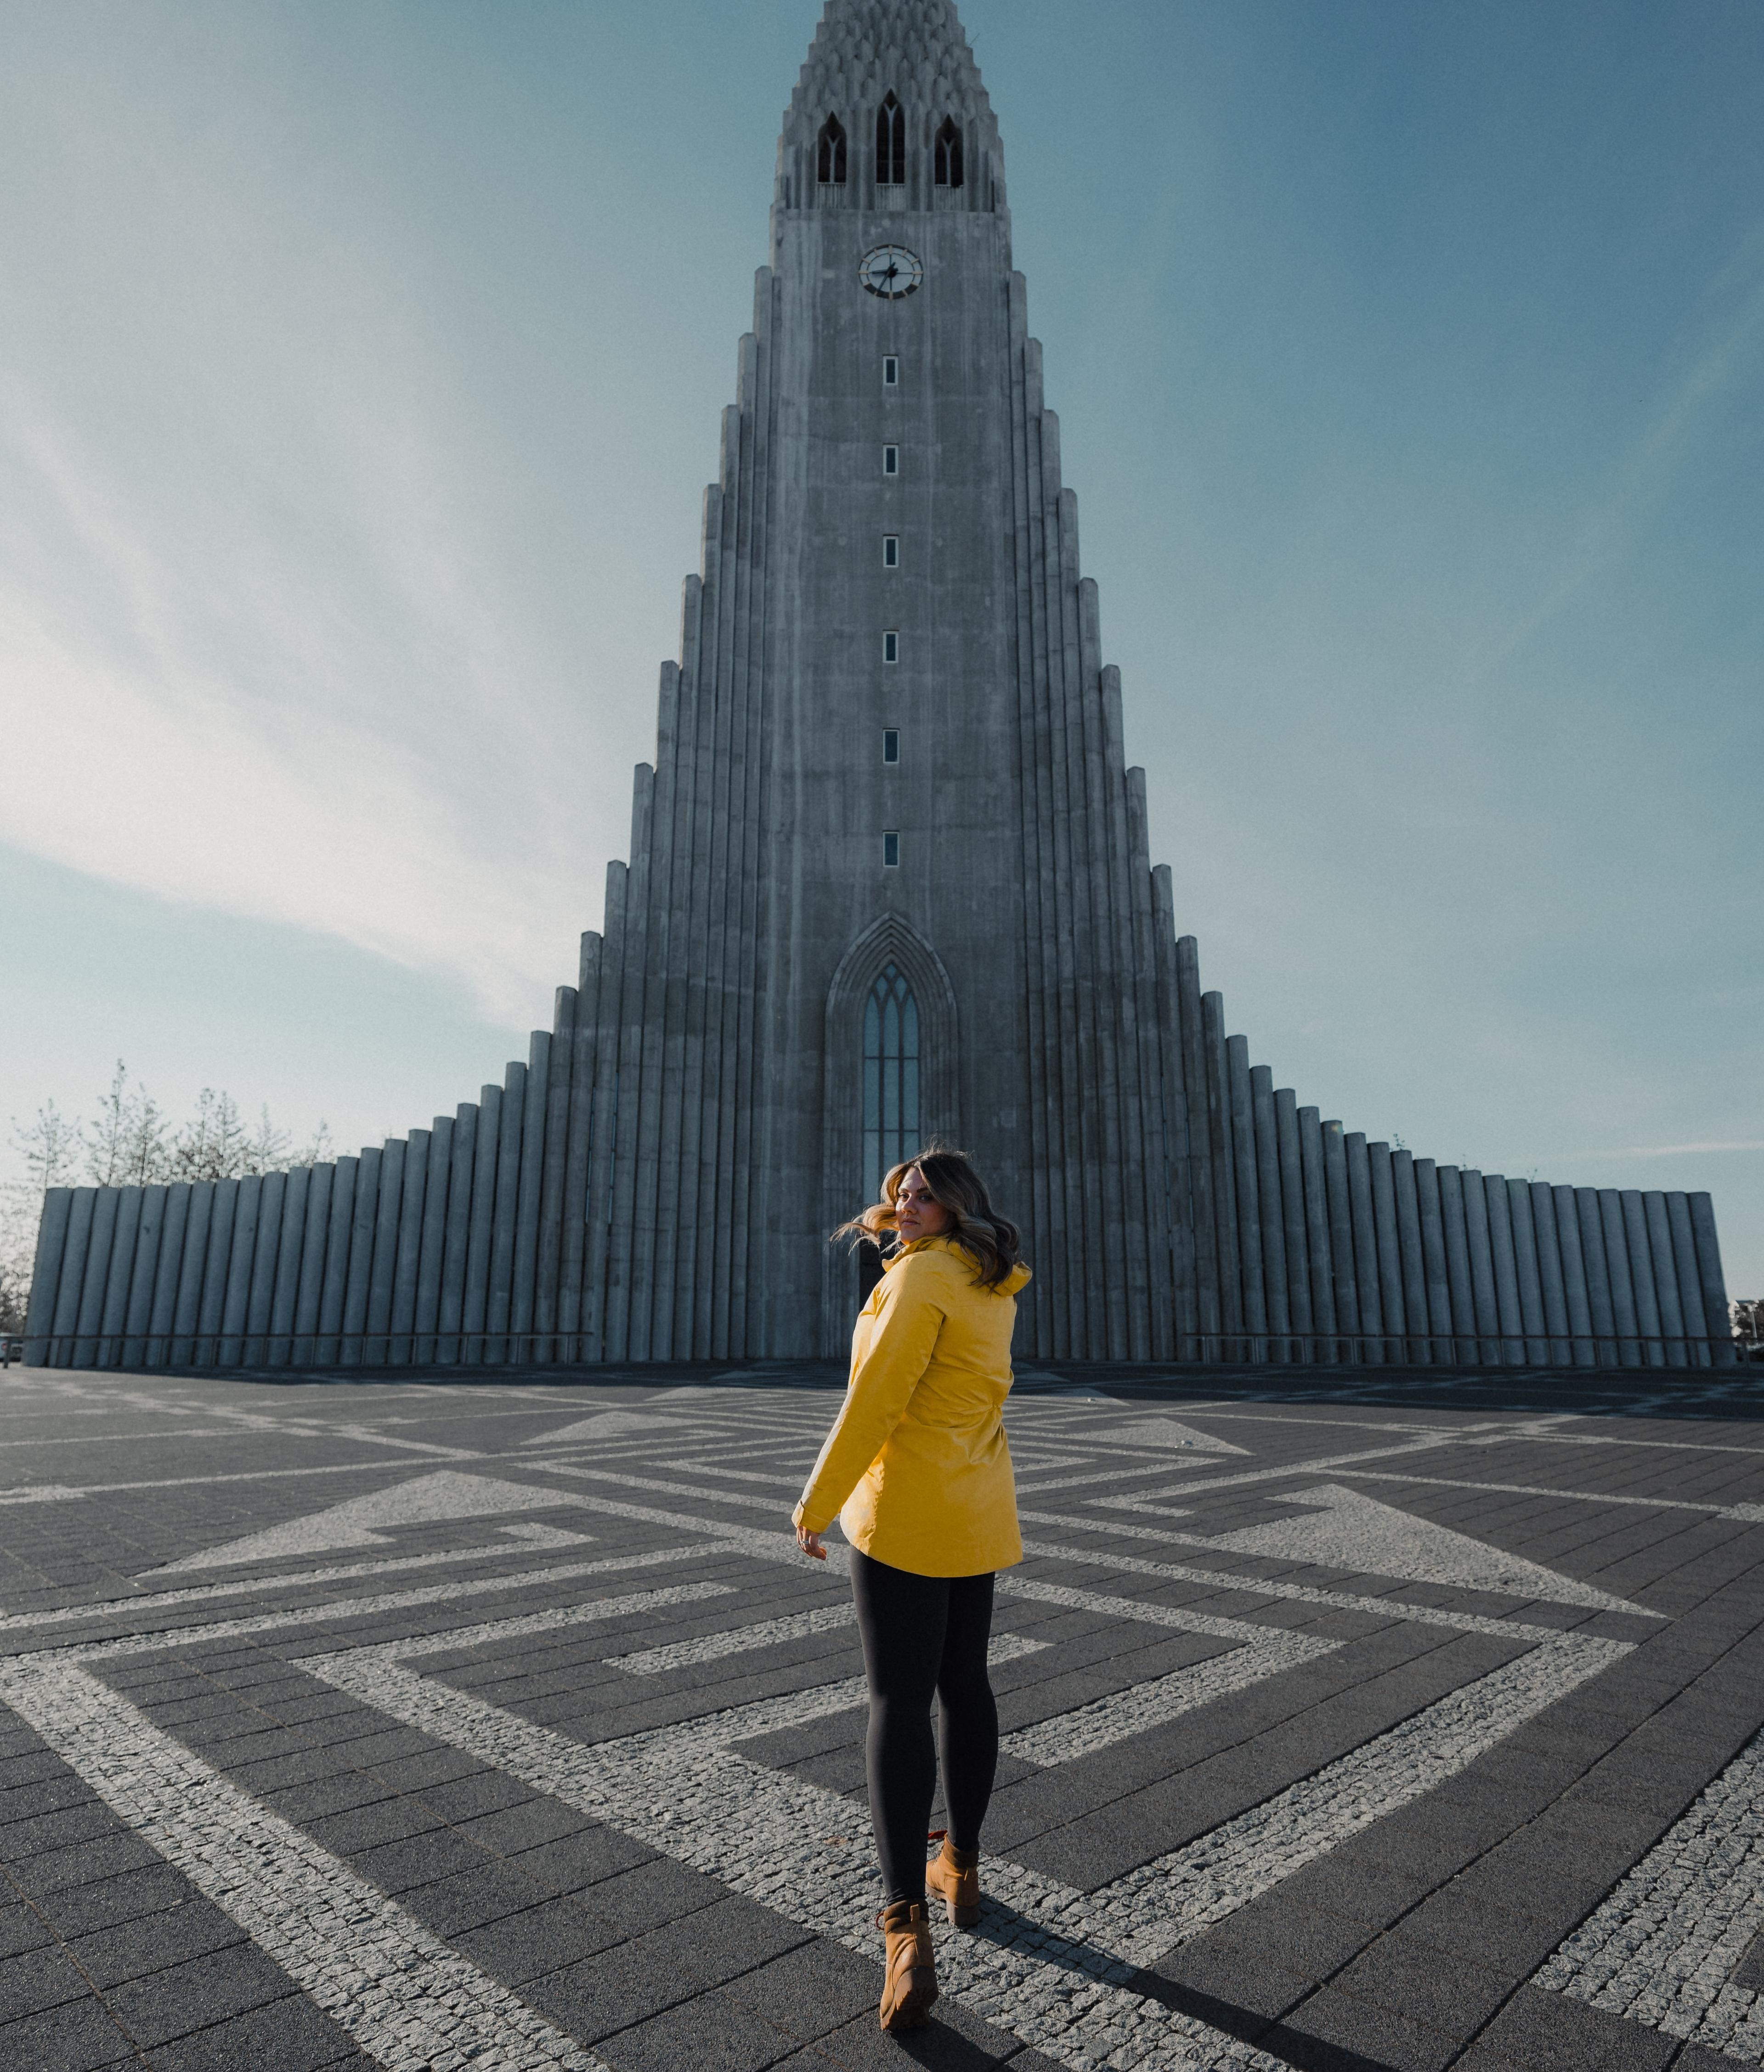 A woman in a light yellow jacket strolling towards the Hallgrimskirkja church, bathed in sunshine